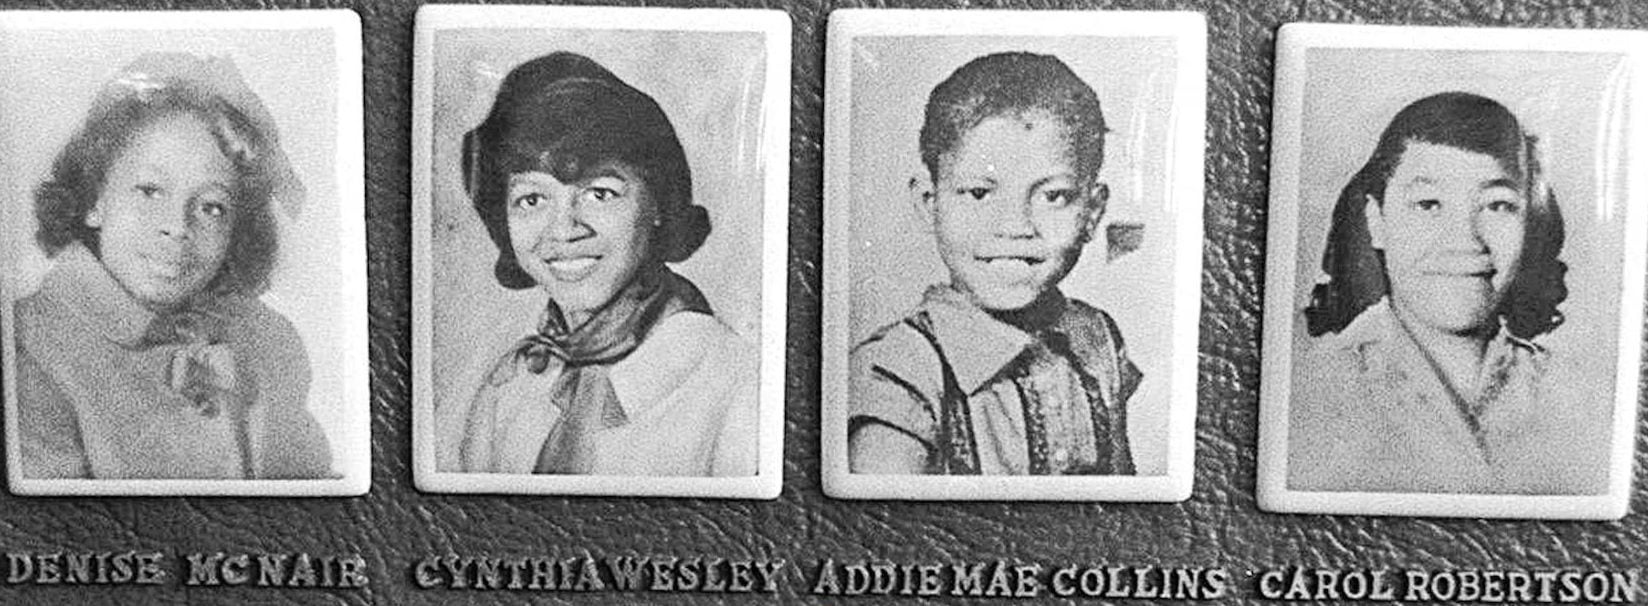 Four Little Girls that was murdered in the 16th St Church bombing